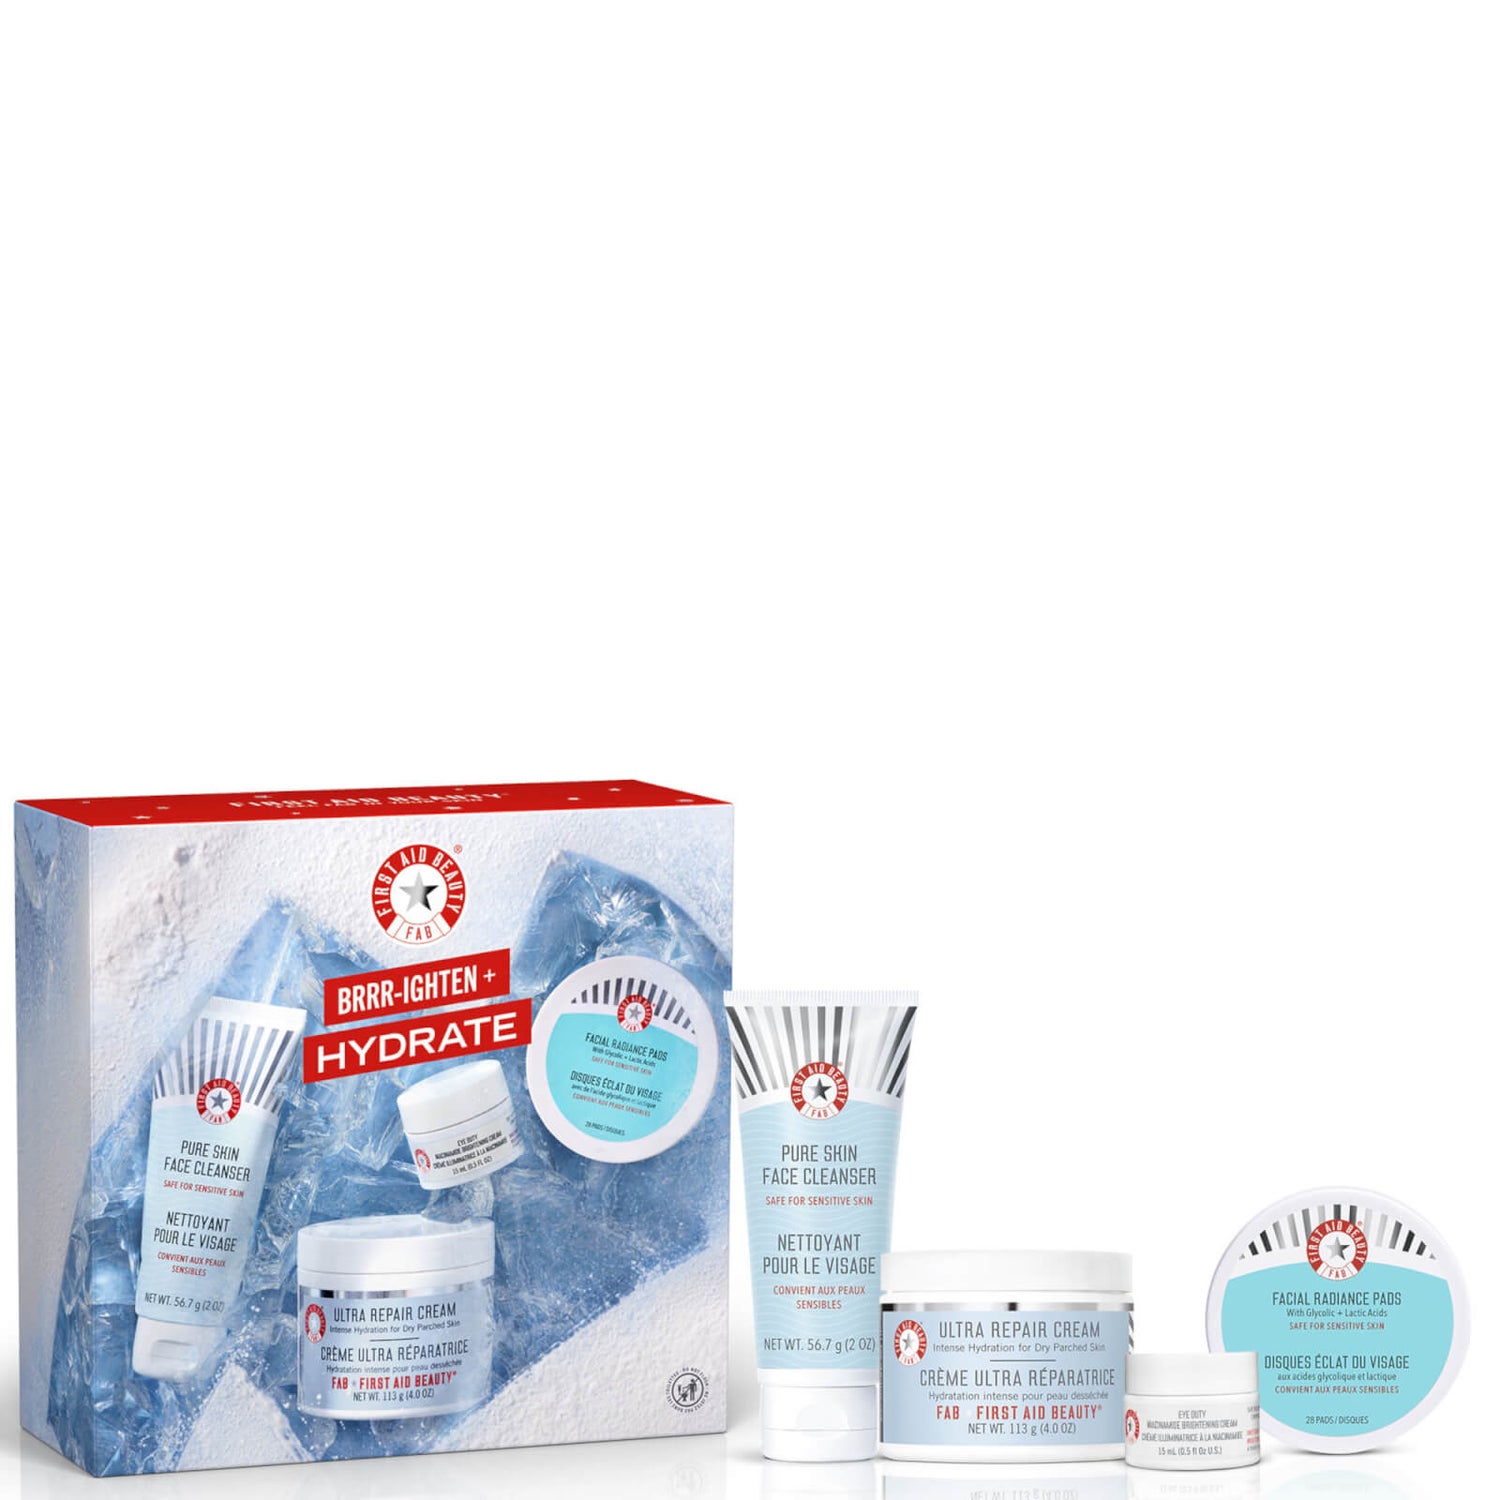 First Aid Beauty Brrr-ighten + Hydrate Holiday Kit (Worth $96)